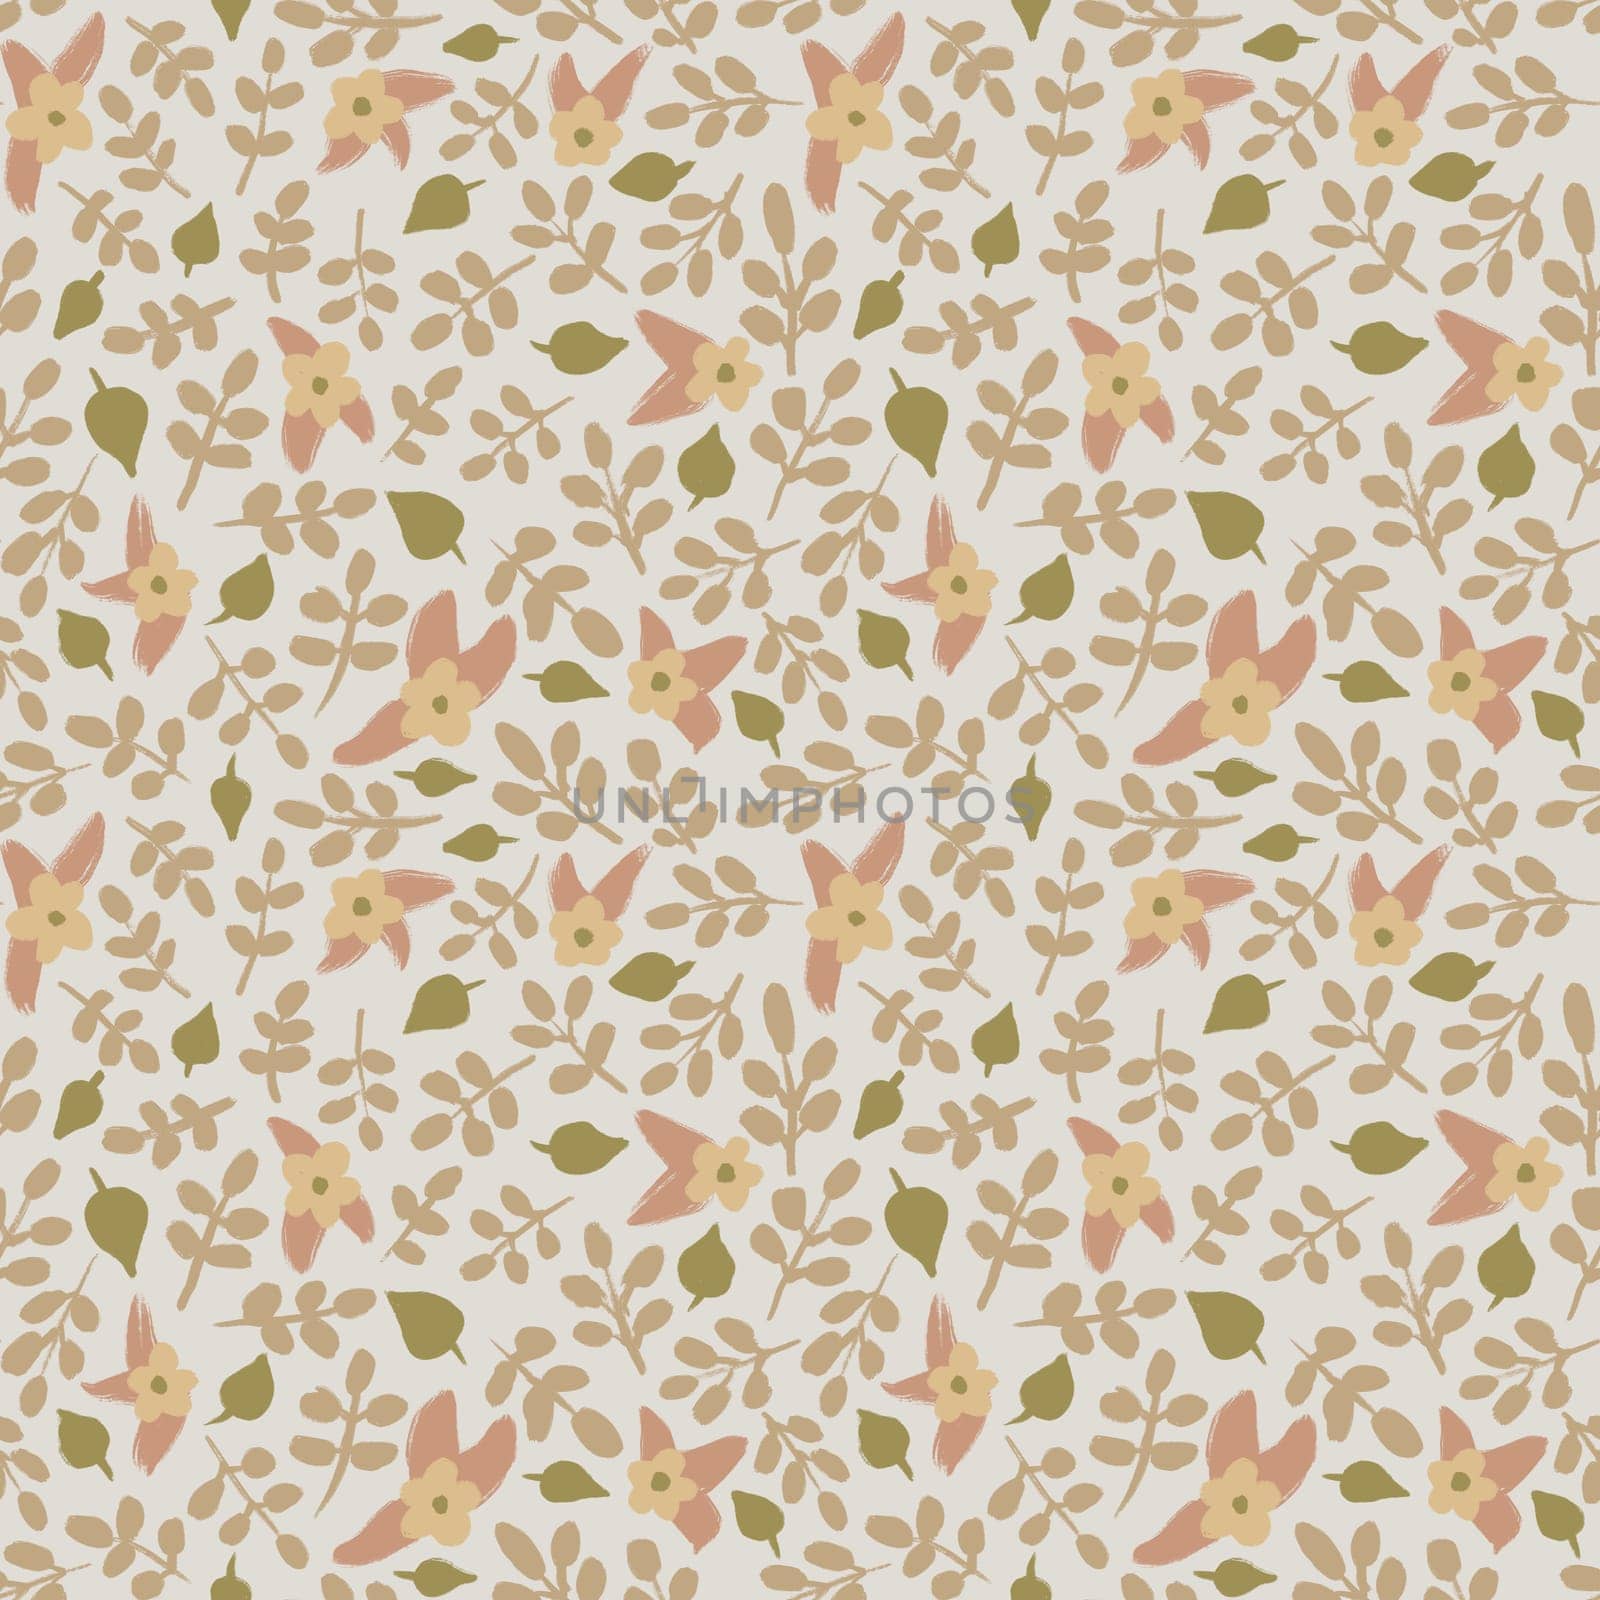 Hand drawn seamless pattern with pastel beige sage green flower floral elements leaves lines dots leaves, ditsy summer spring botanical nature print, bloom blossom stylized petals meadow